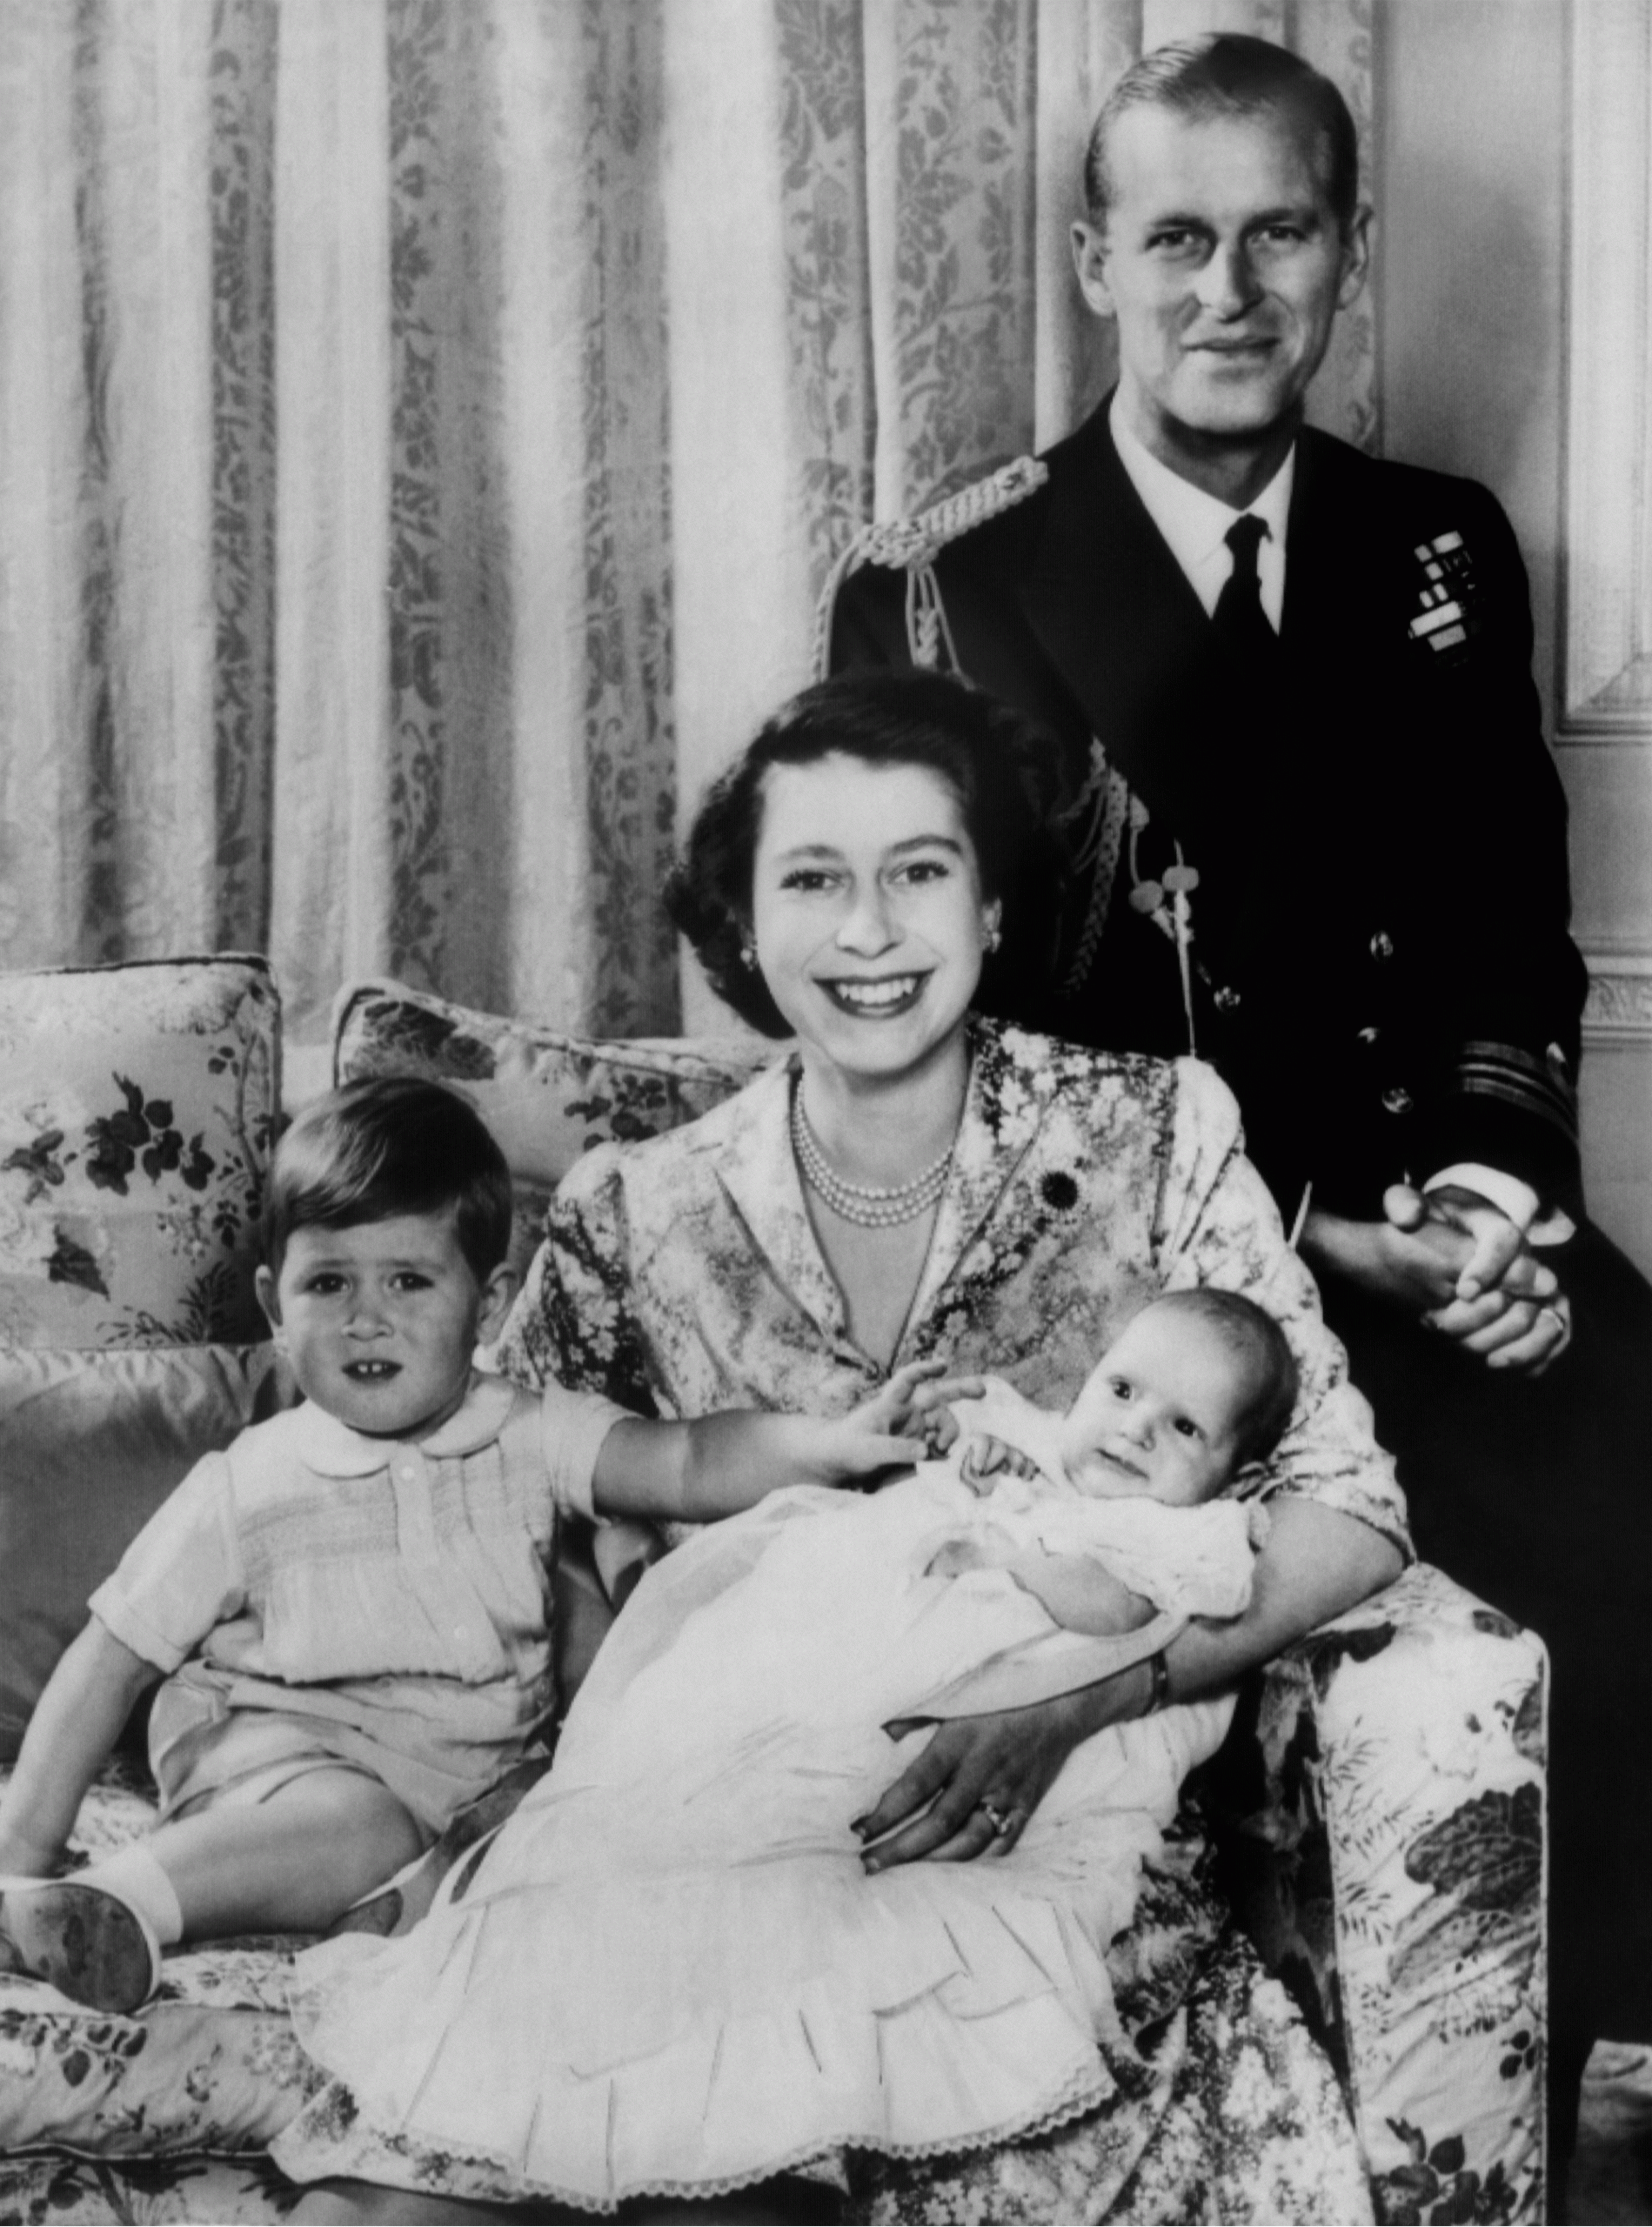 Queen Elizabeth II and Prince Phillip with their young family in 1951